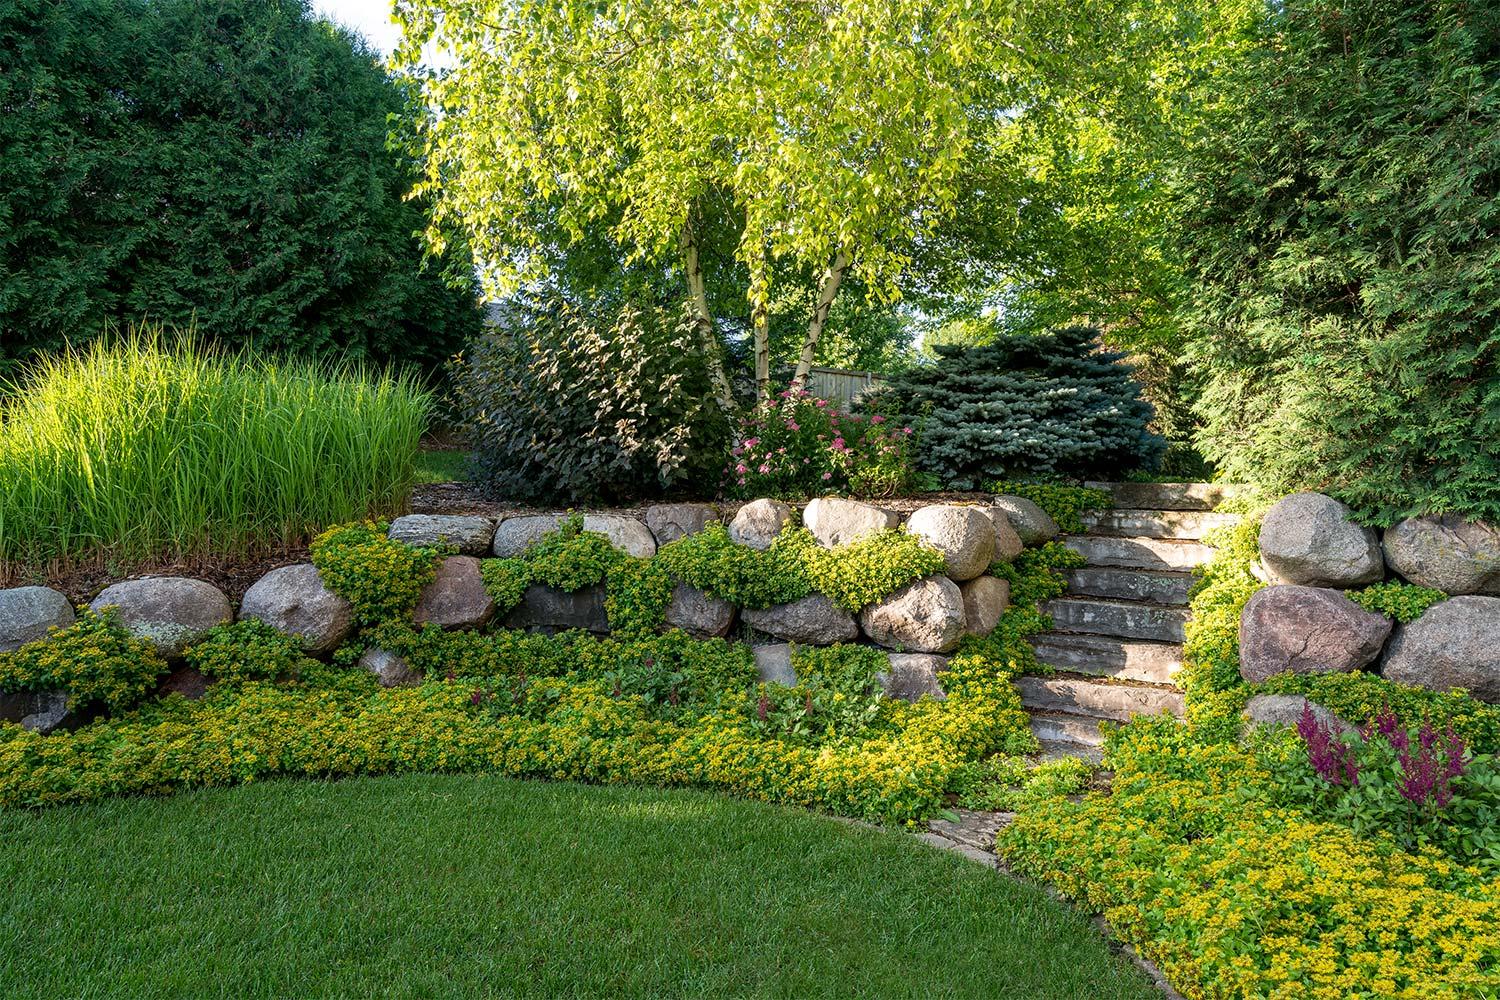 Lush green grass lawn surrounded by Sedum garden and boulder retaining wall with stone steps leading to a fireplace.